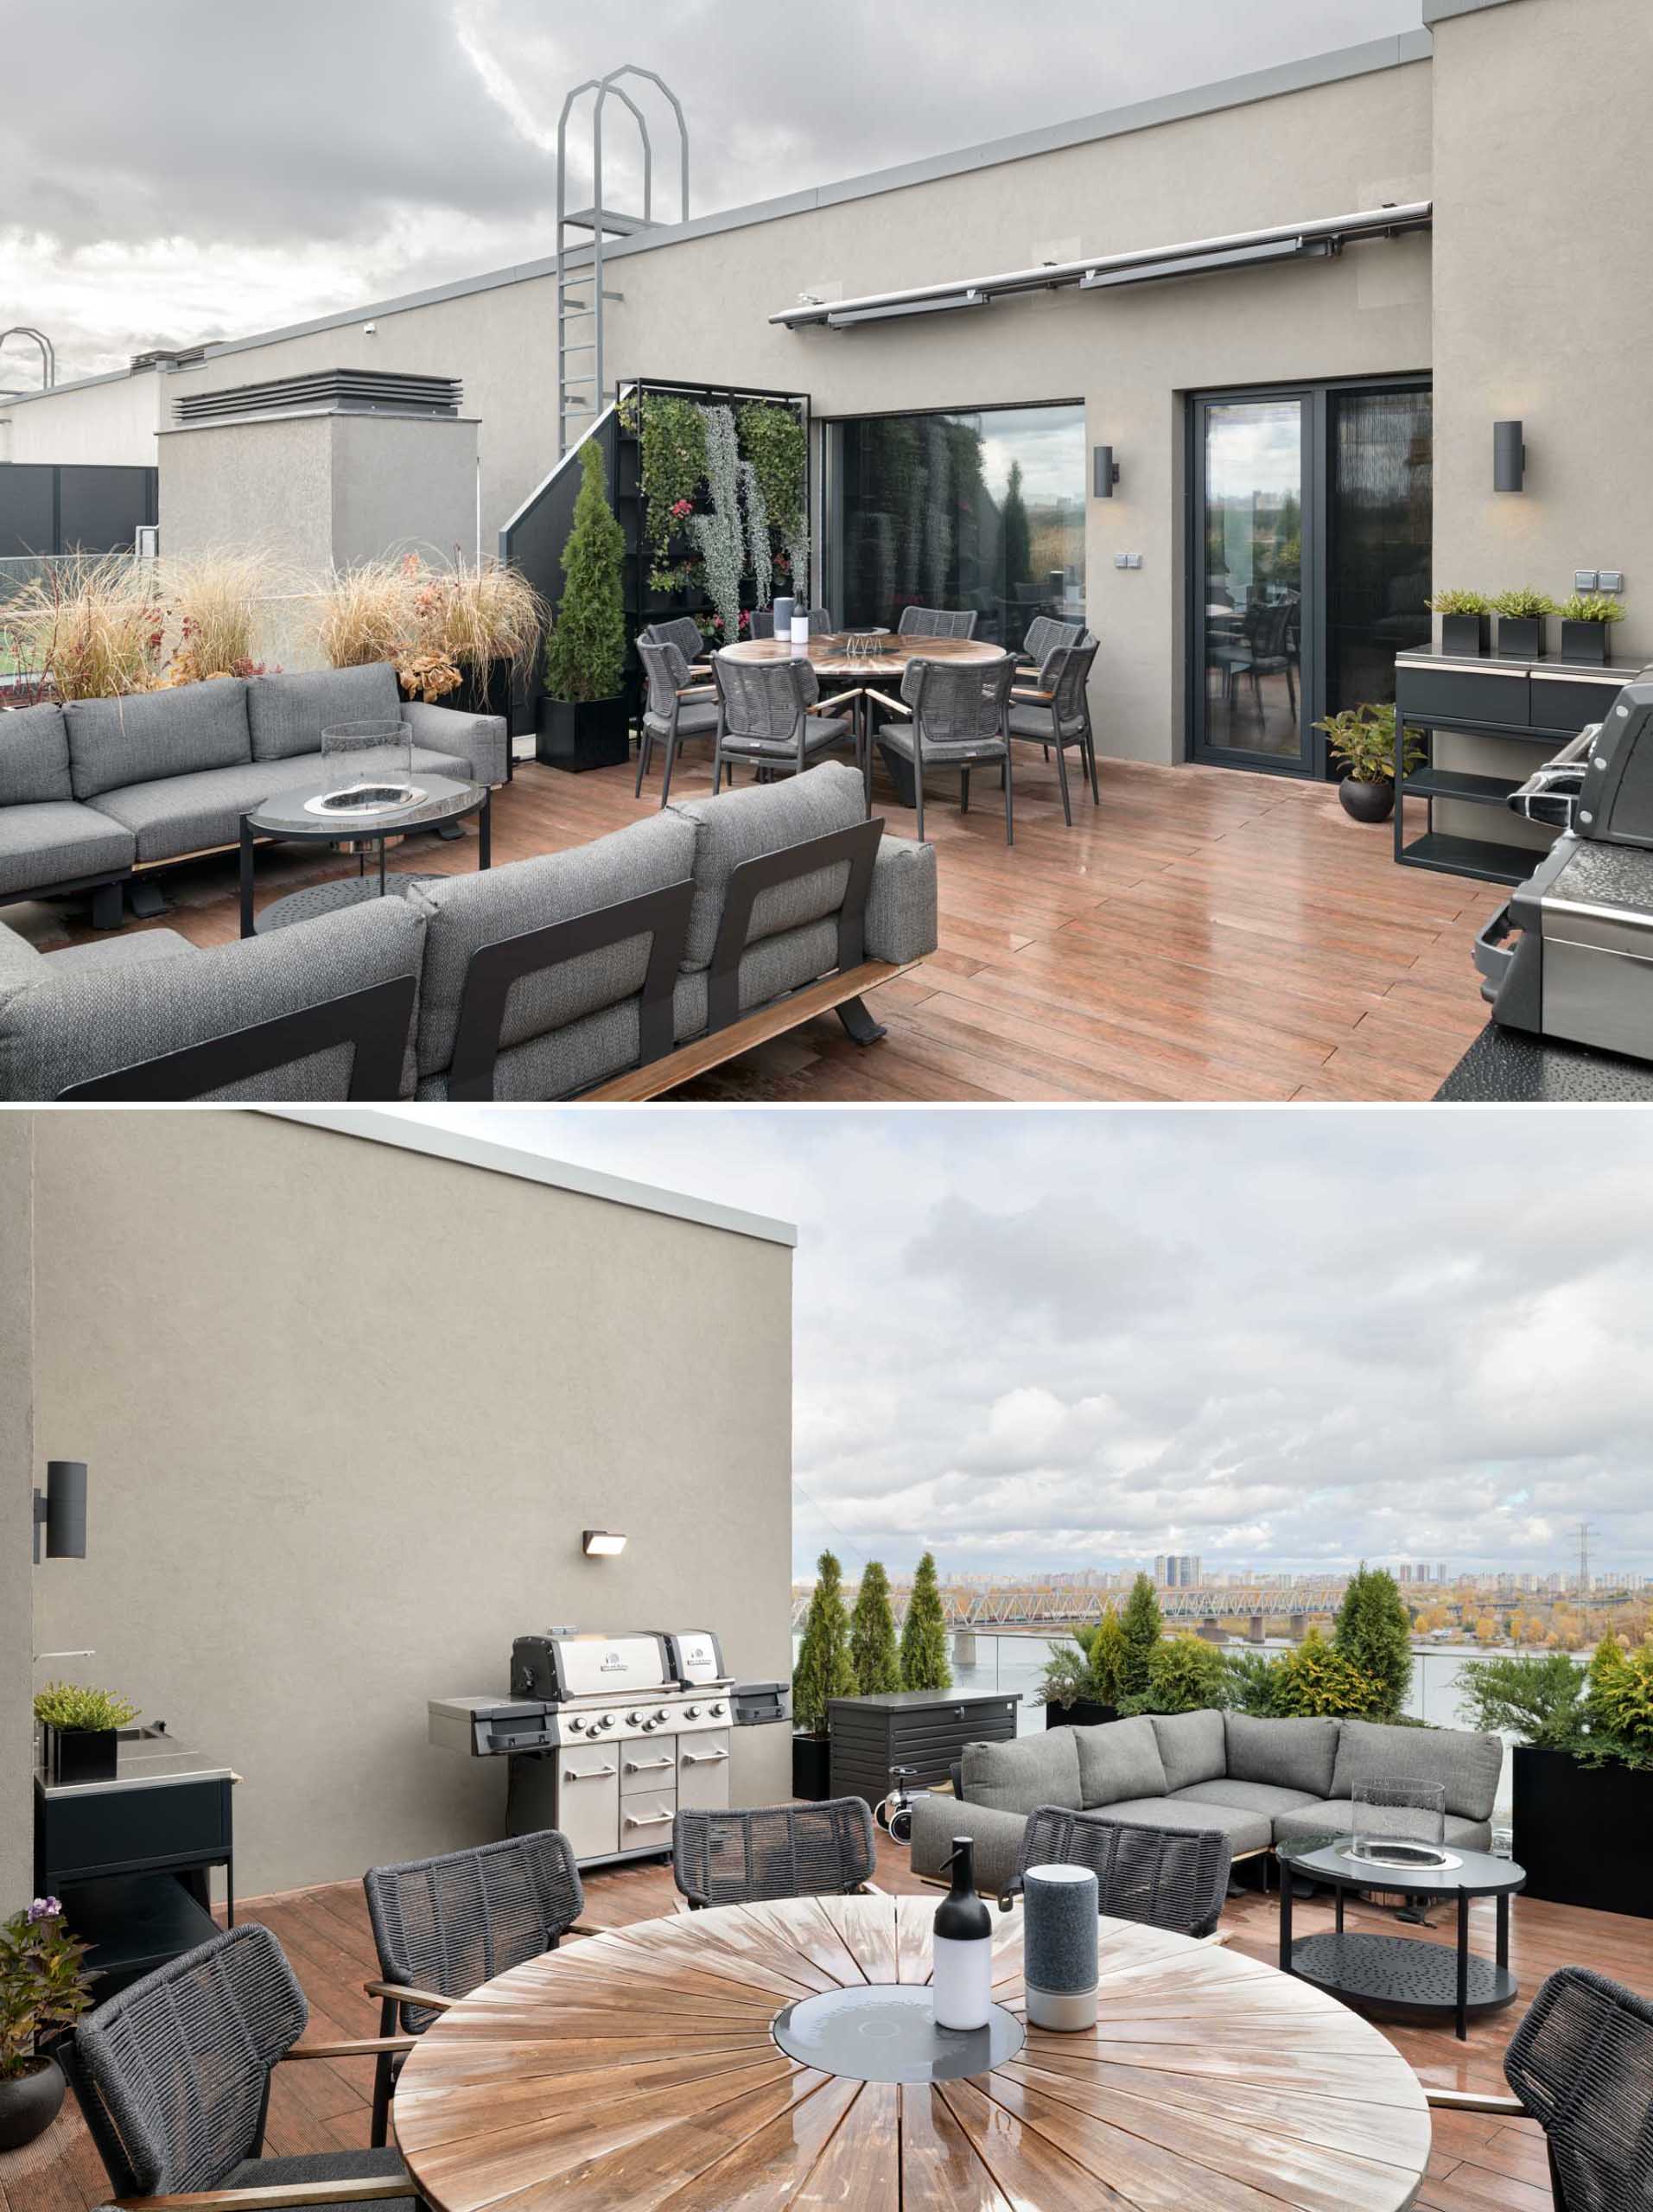 This modern terrace includes an outdoor dining area with a round table, a lounge area with a pair of couches, and a BBQ.